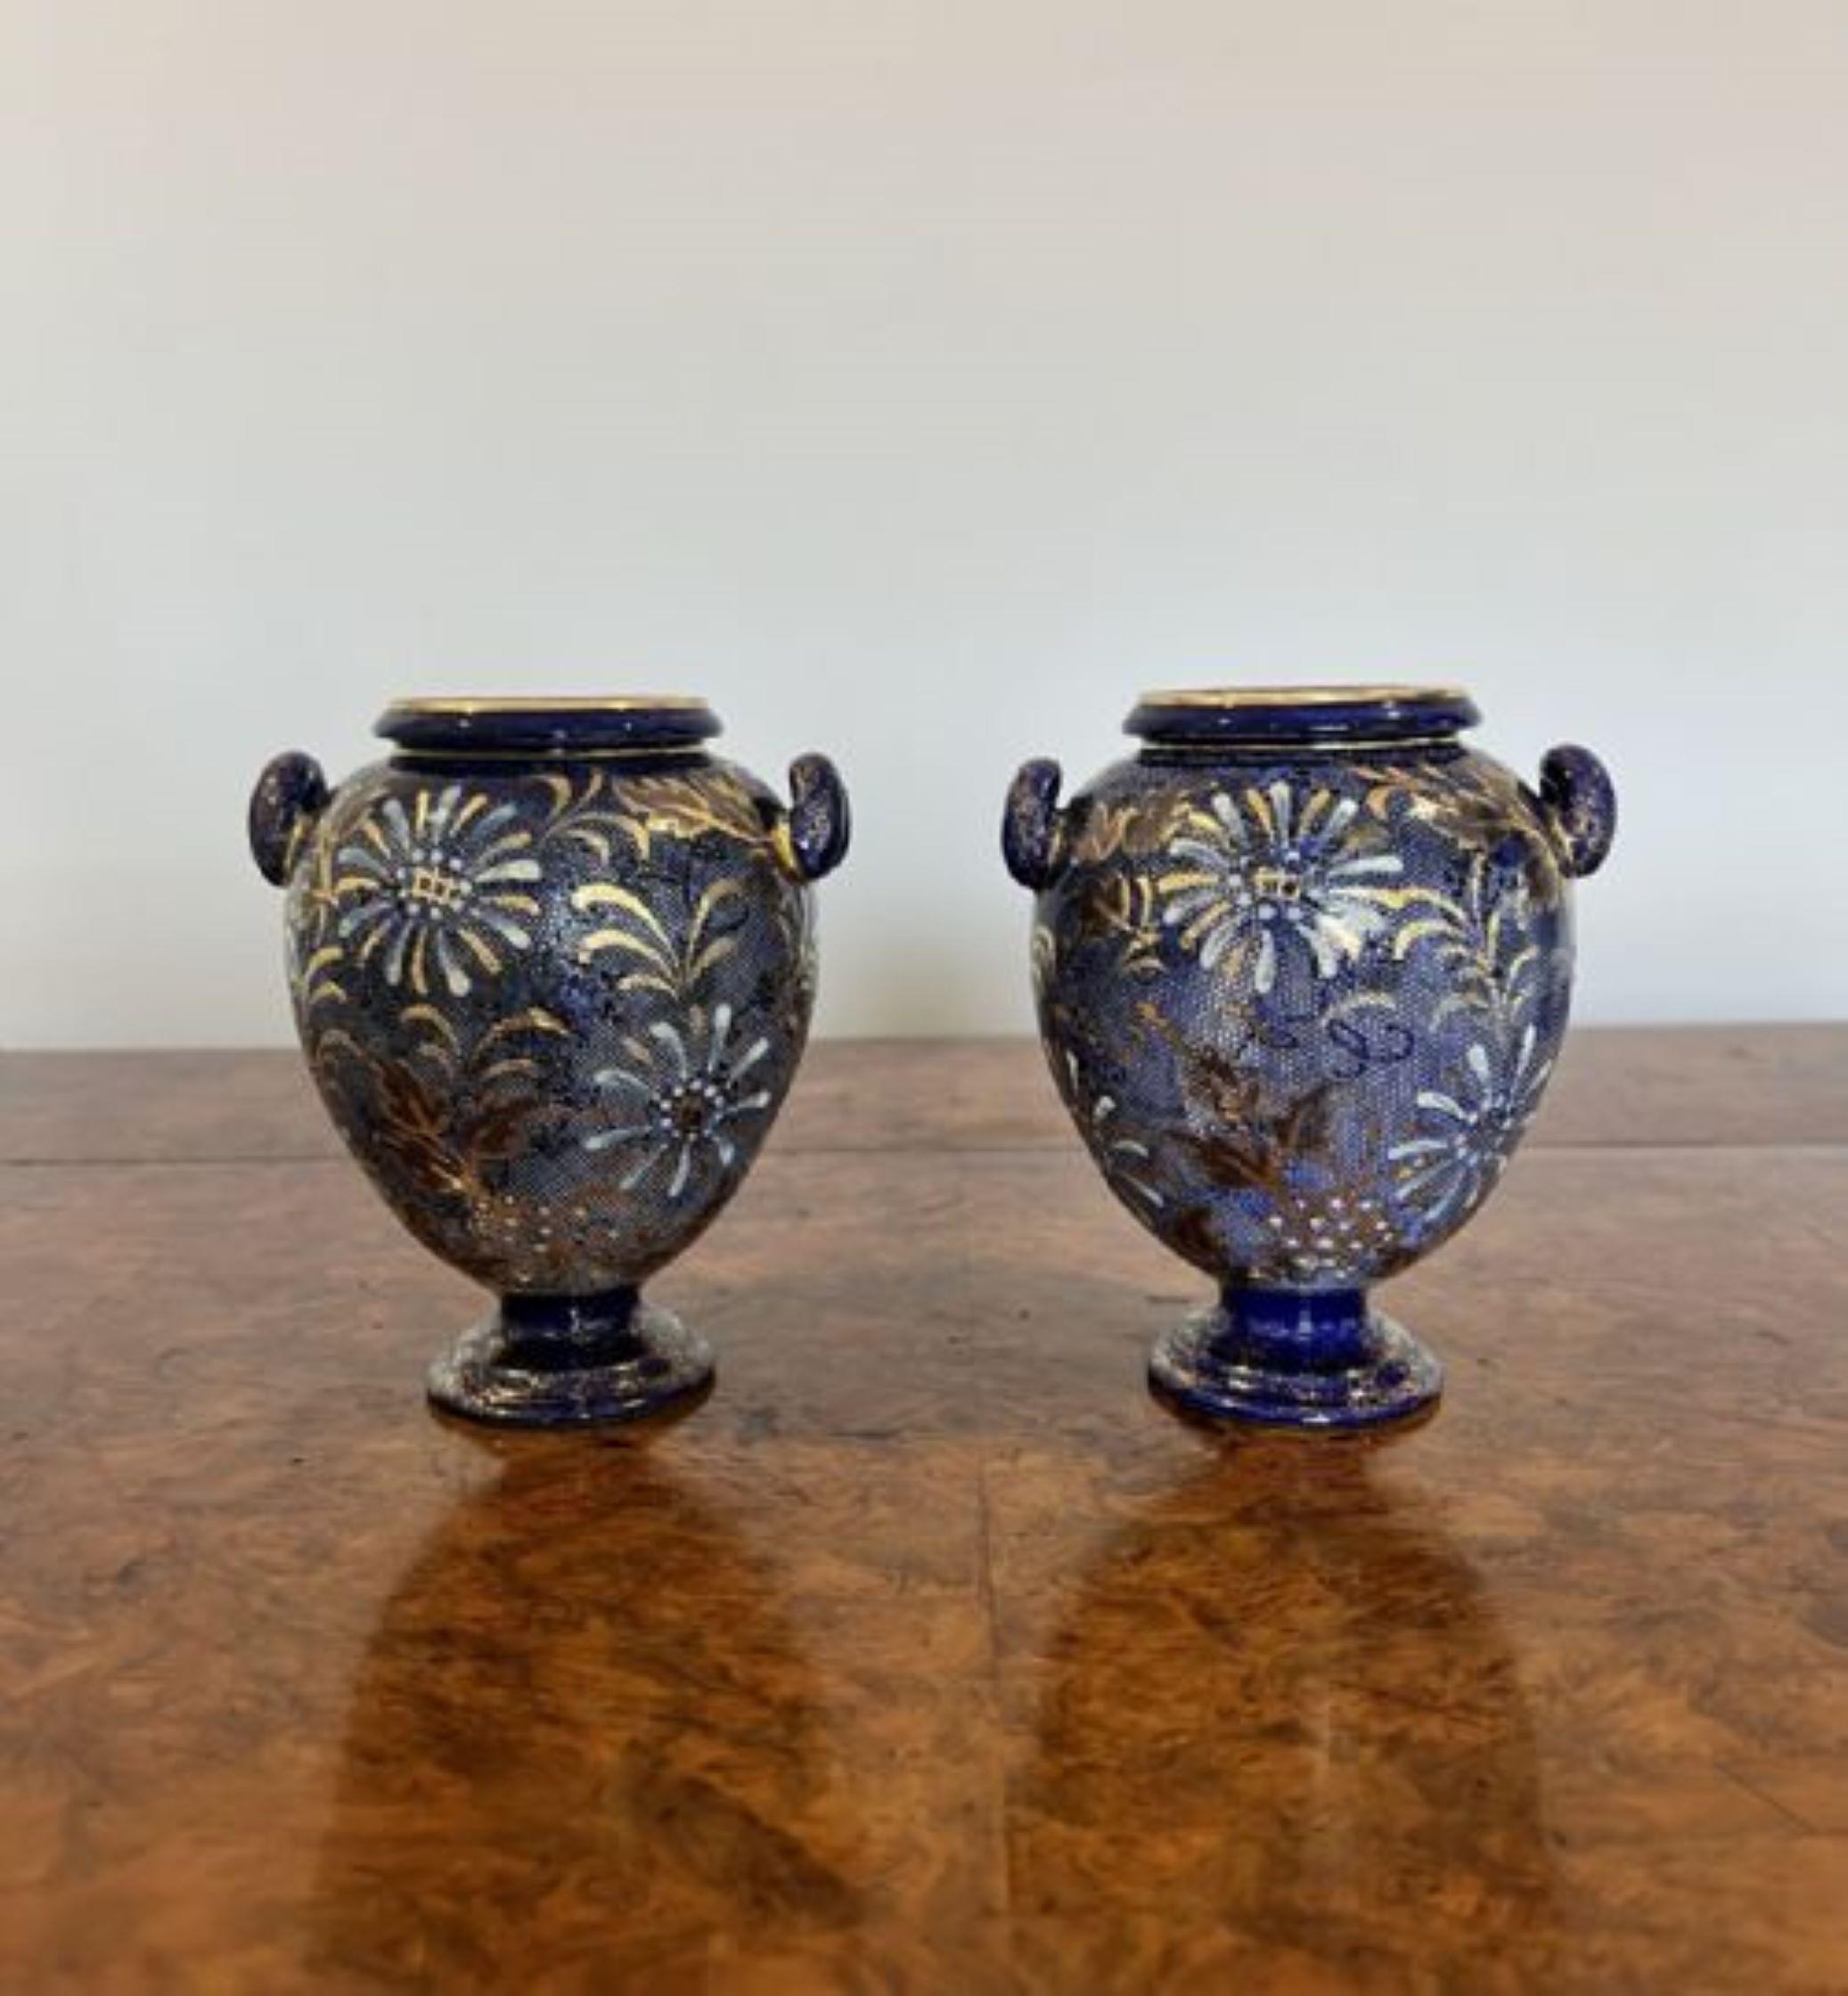 Small pair of  antique Doulton vases having a lovely pair of antique Doulton vases decorated with golden and white flowers on a blue background with a shaped body standing on circular bases. 